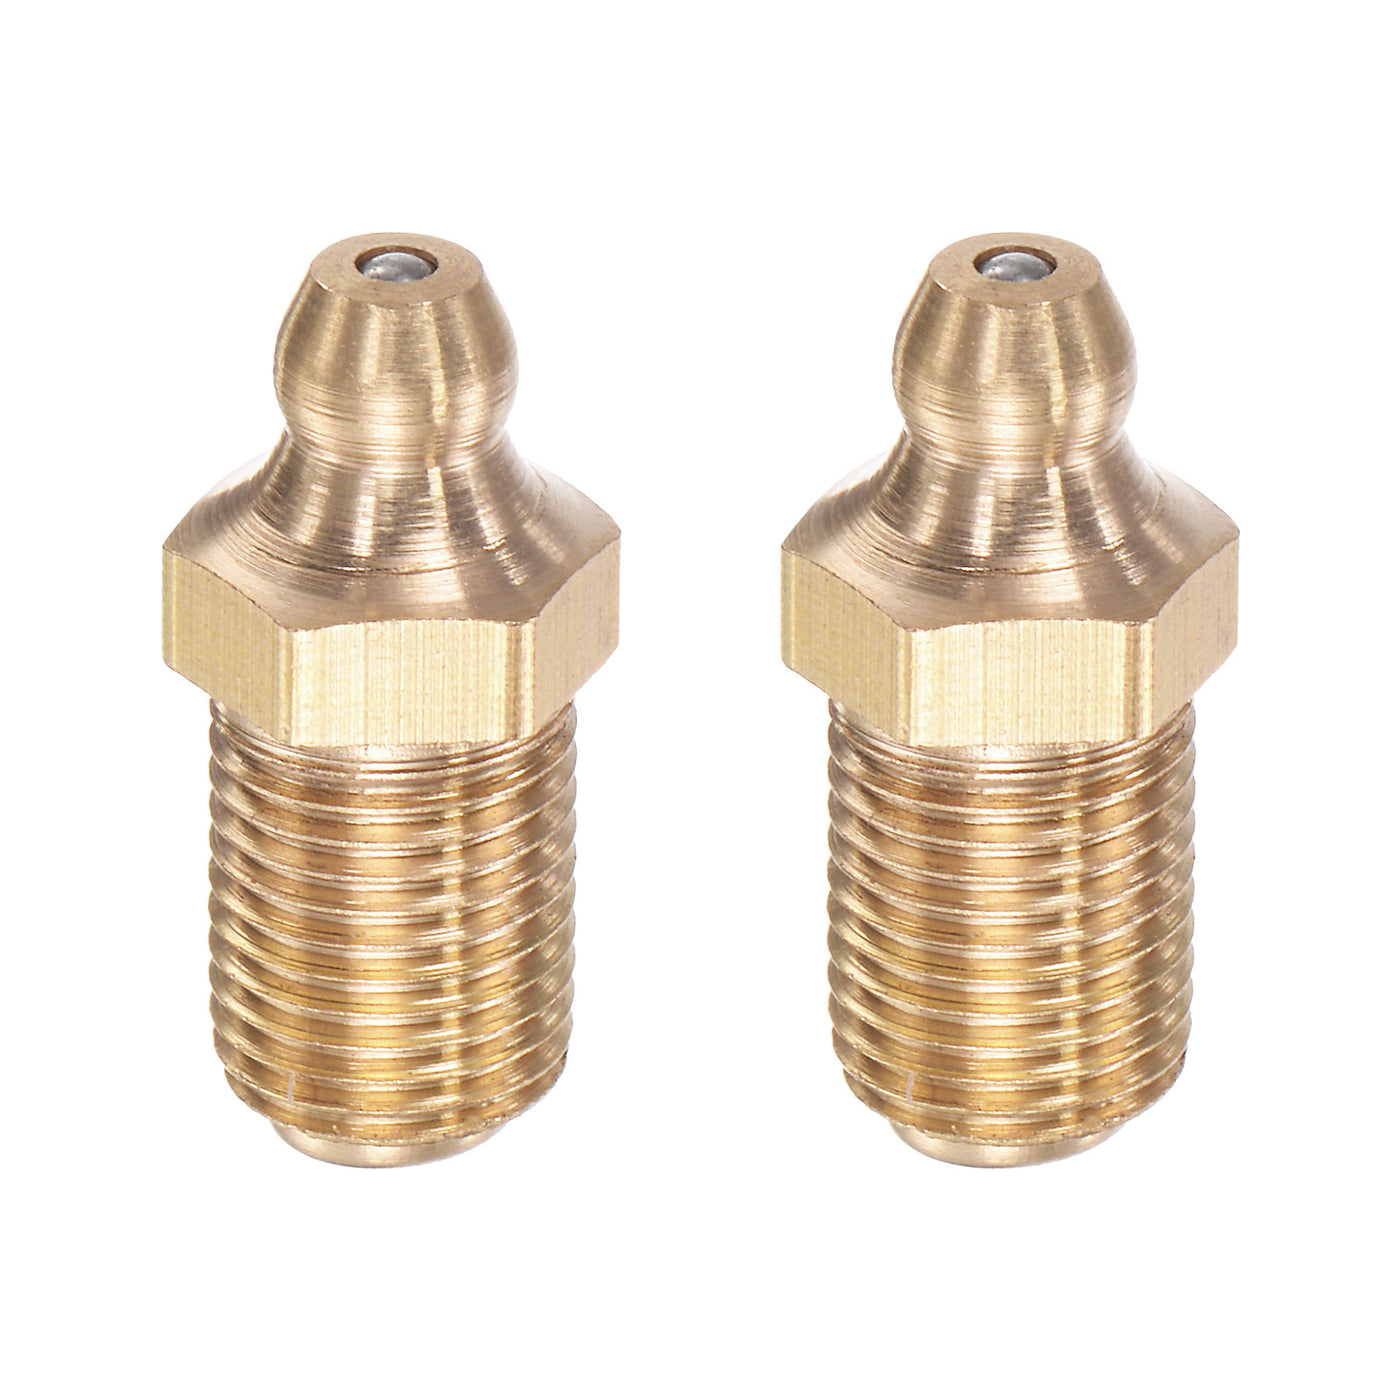 uxcell Uxcell 2Pcs Metric Brass Straight Hydraulic Grease Fitting M10 x 1mm Lengthened Thread